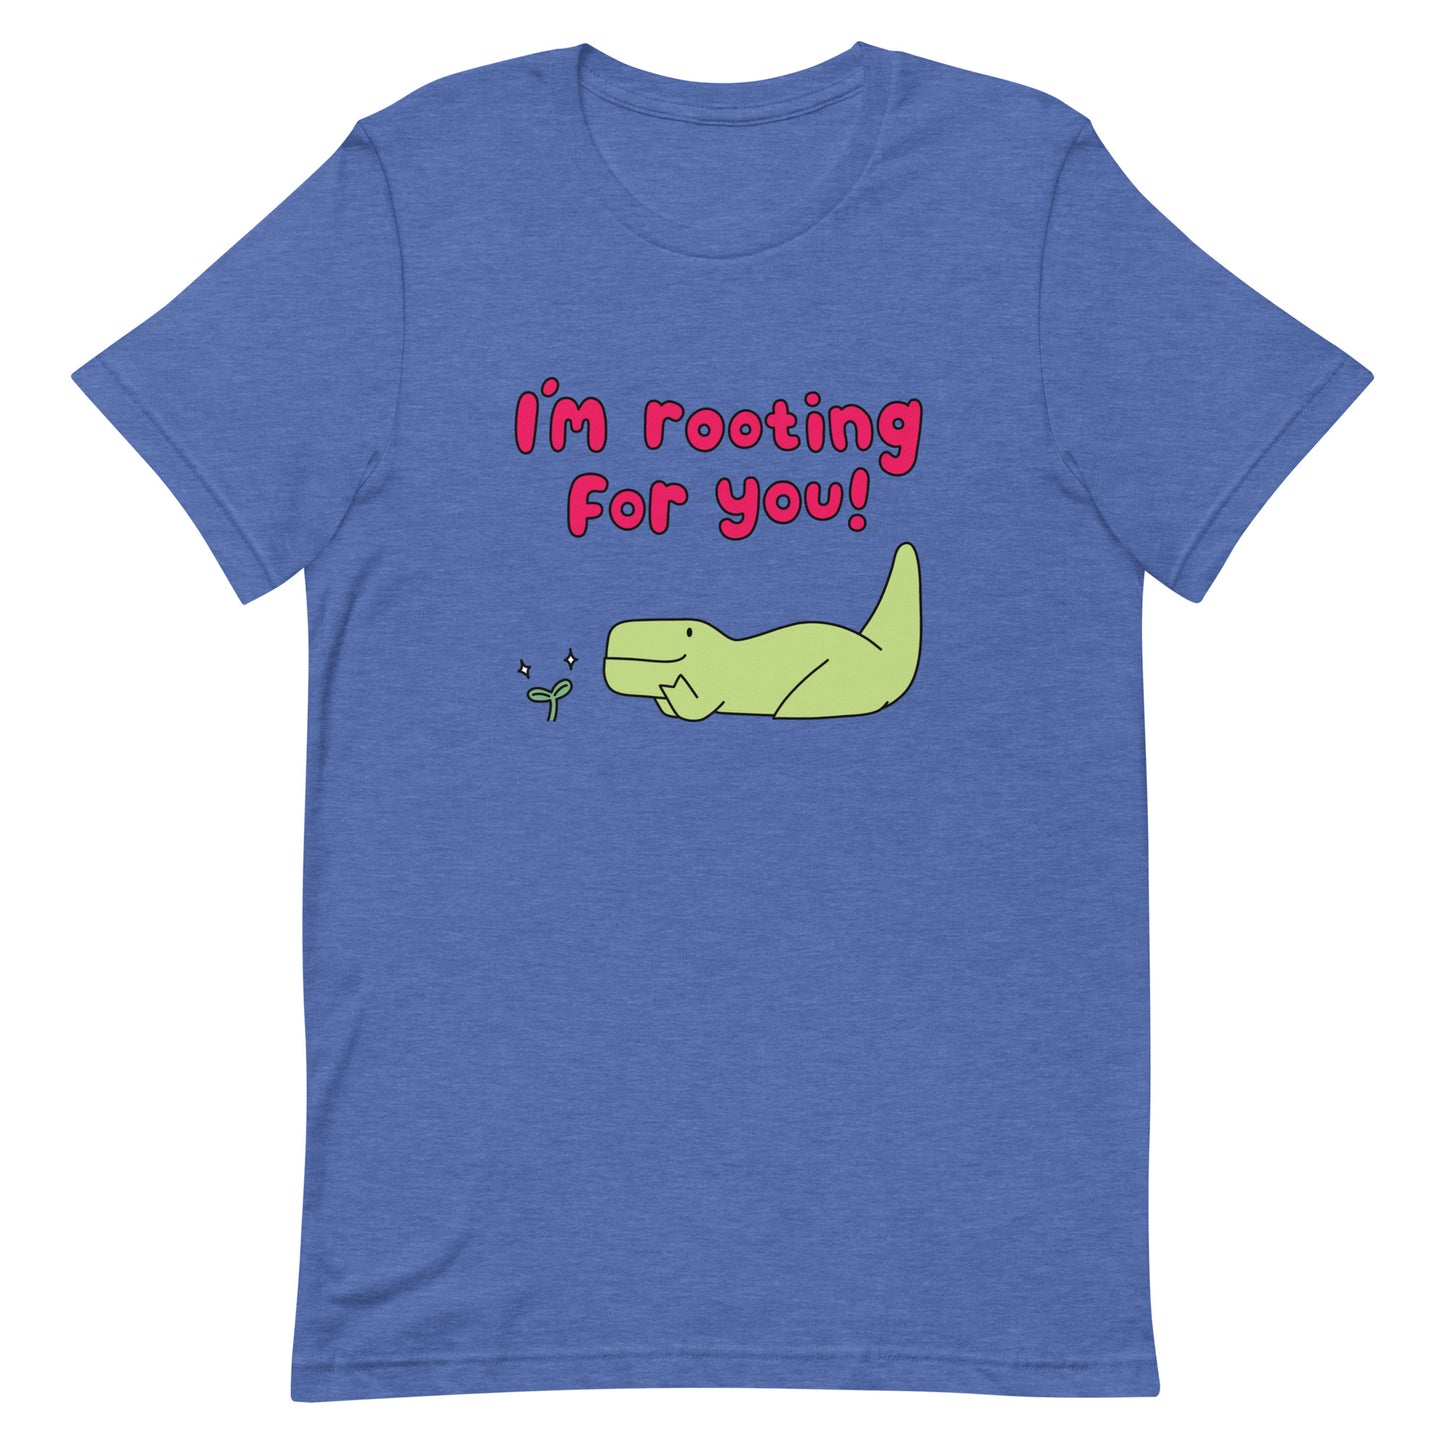 I'm Rooting For You Unisex T-Shirt